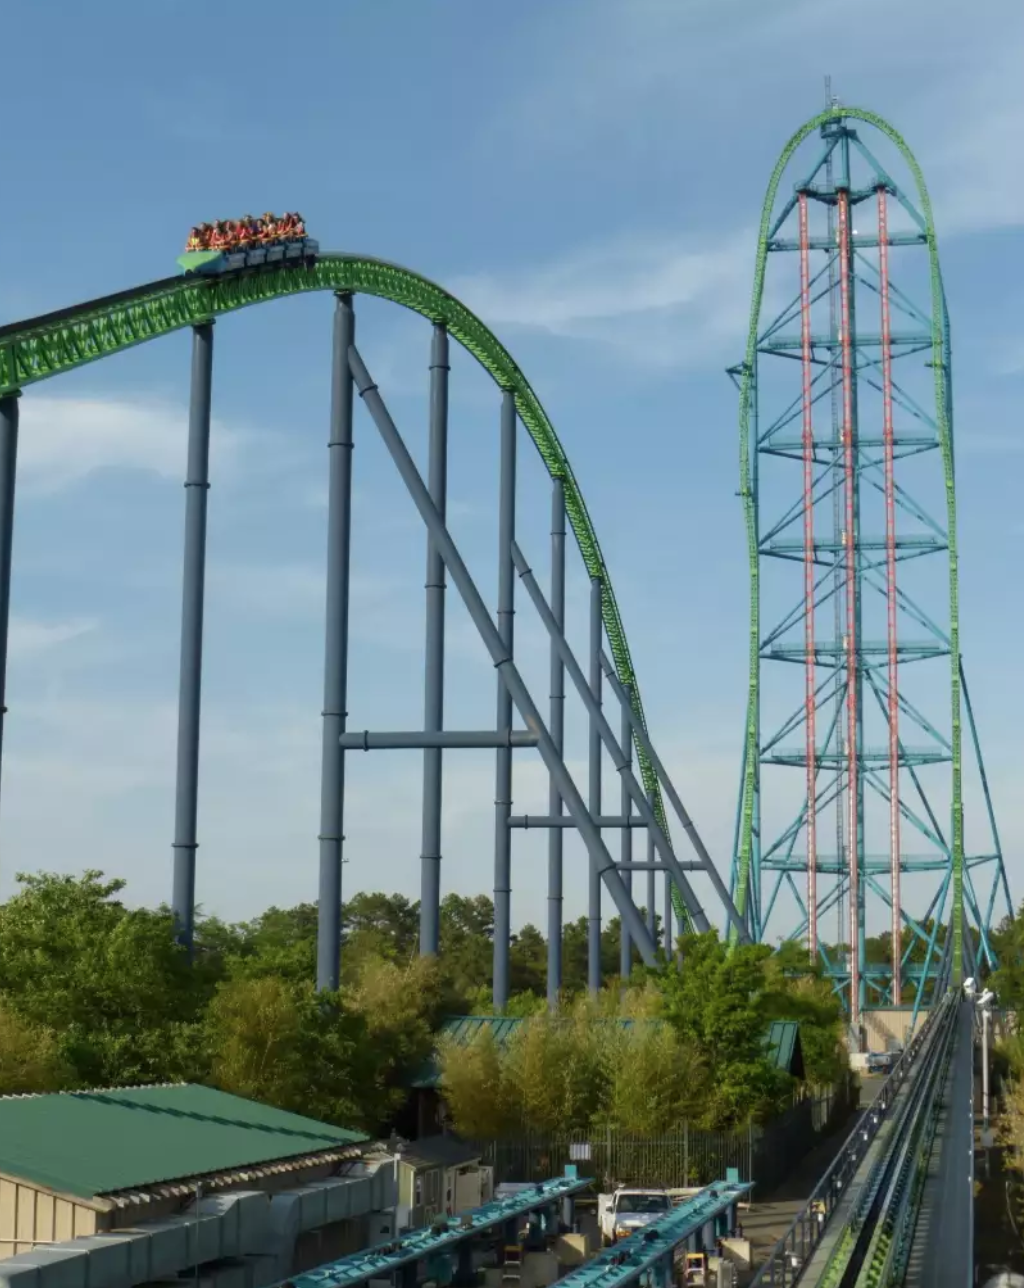 10 Scariest rides in the world that will leave you screaming your lungs out